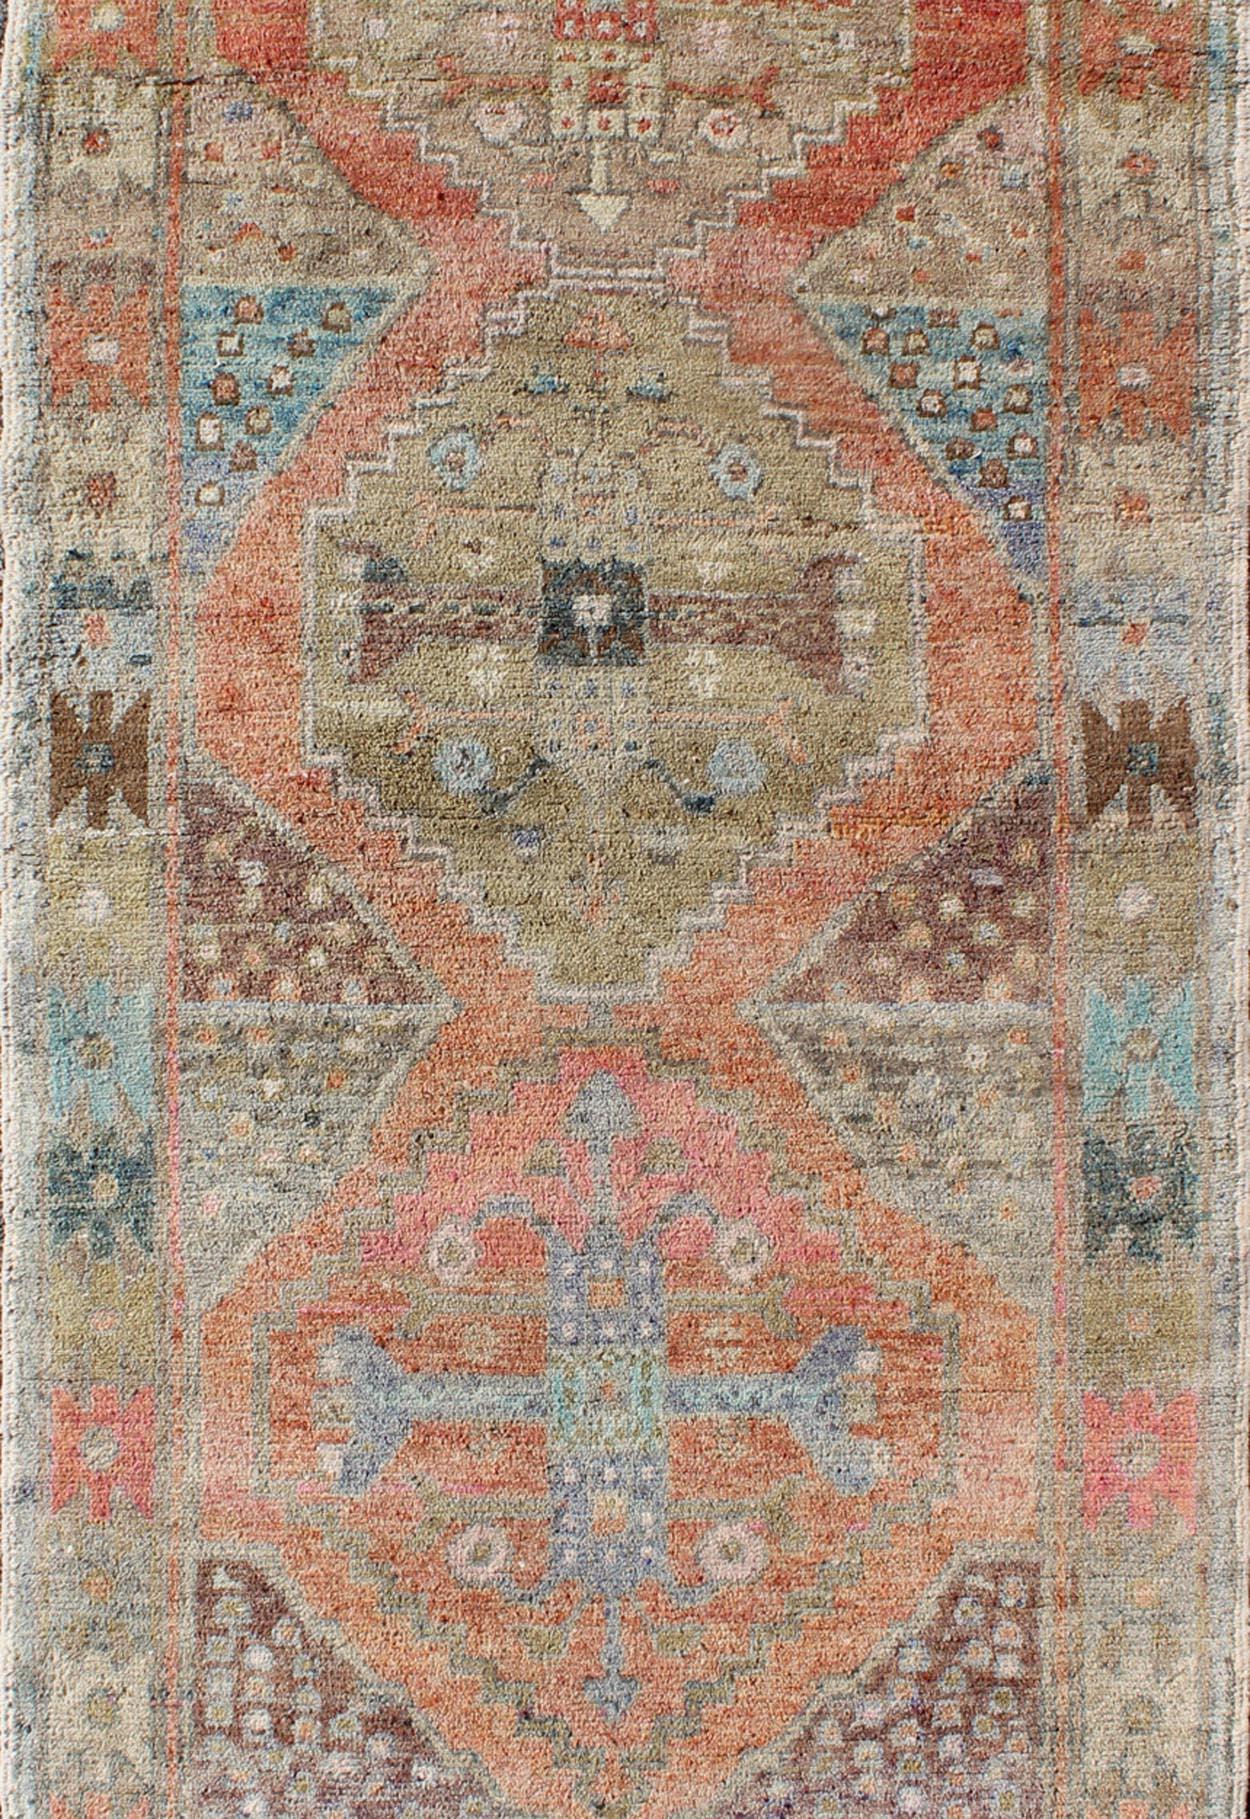 Antique Turkish Oushak Runner in Coral, Blue, Brown, Yellow Green & Rust Red In Excellent Condition For Sale In Atlanta, GA